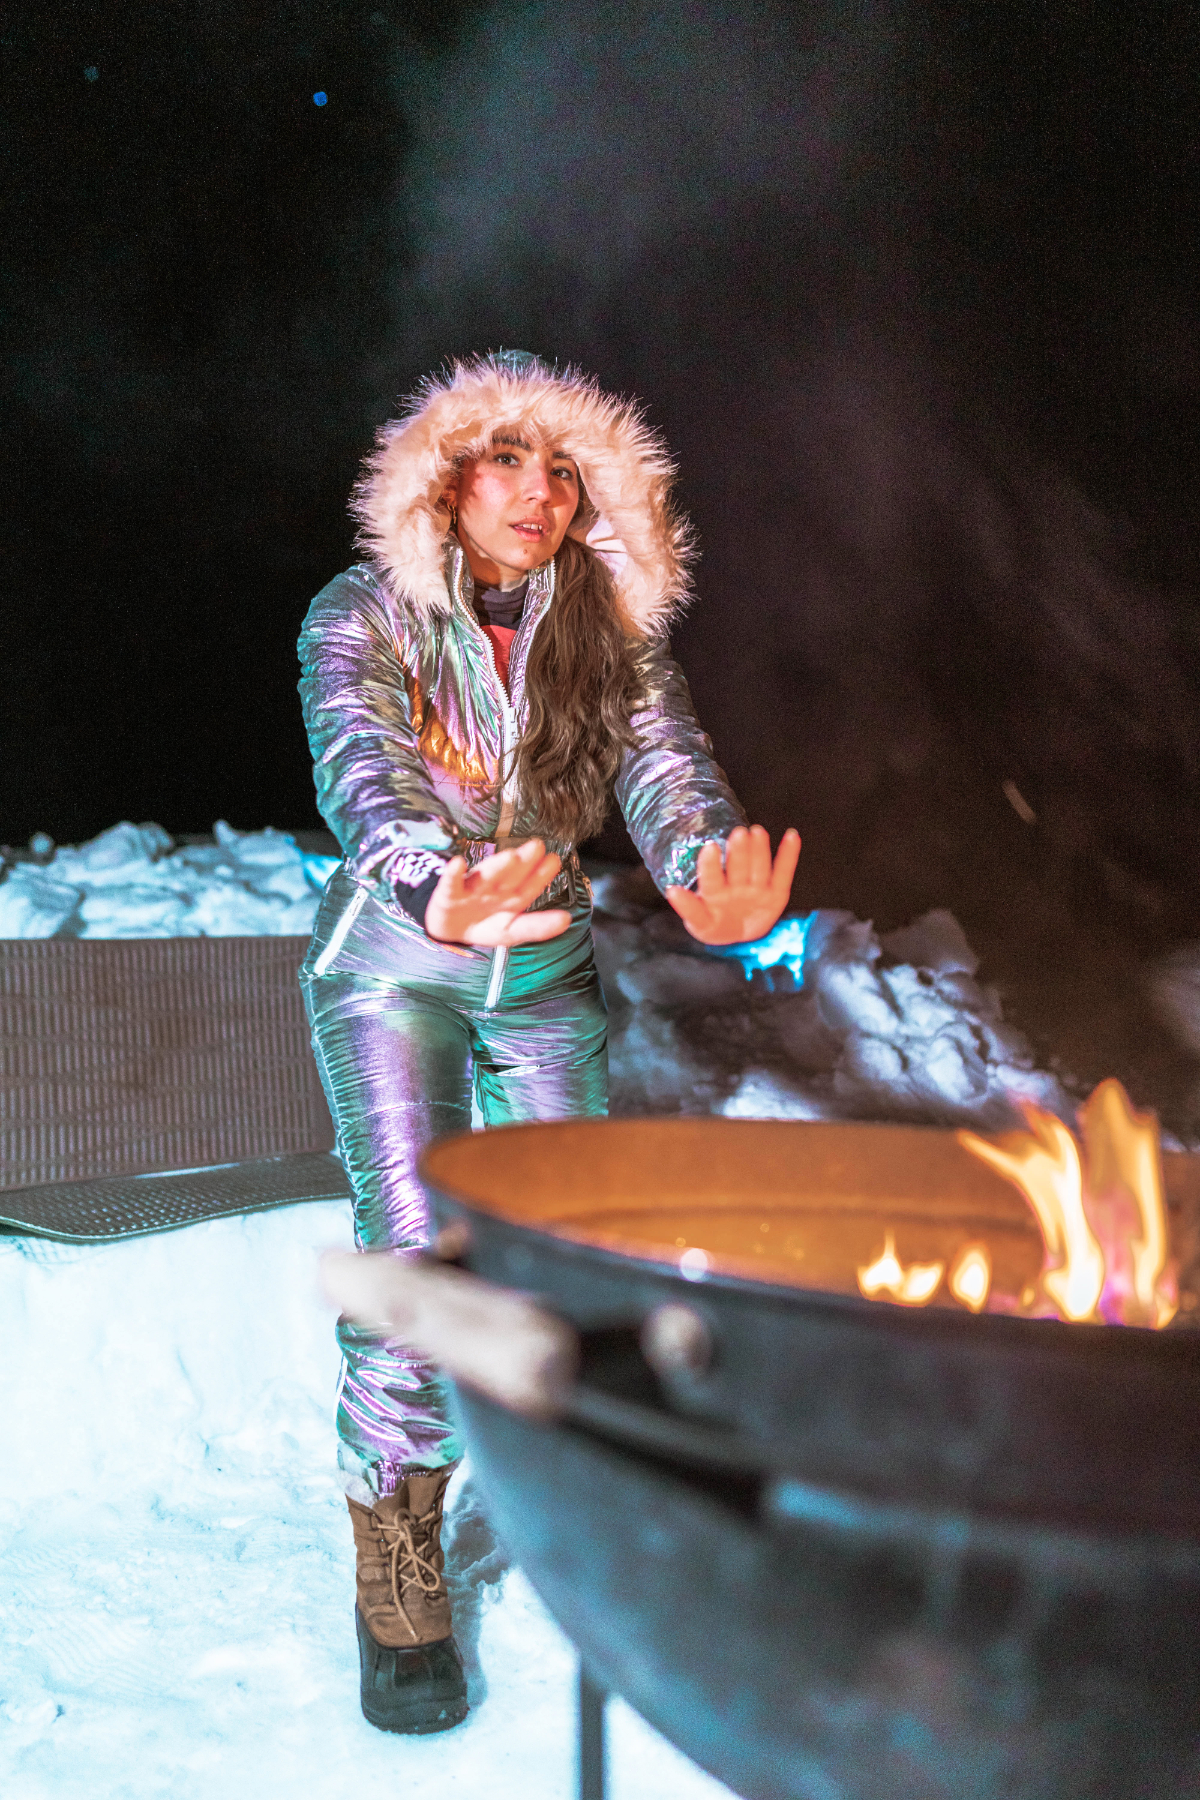 Lauryn Hock warms her hands over a fire during a night snowshoing adventure in Central Oregon